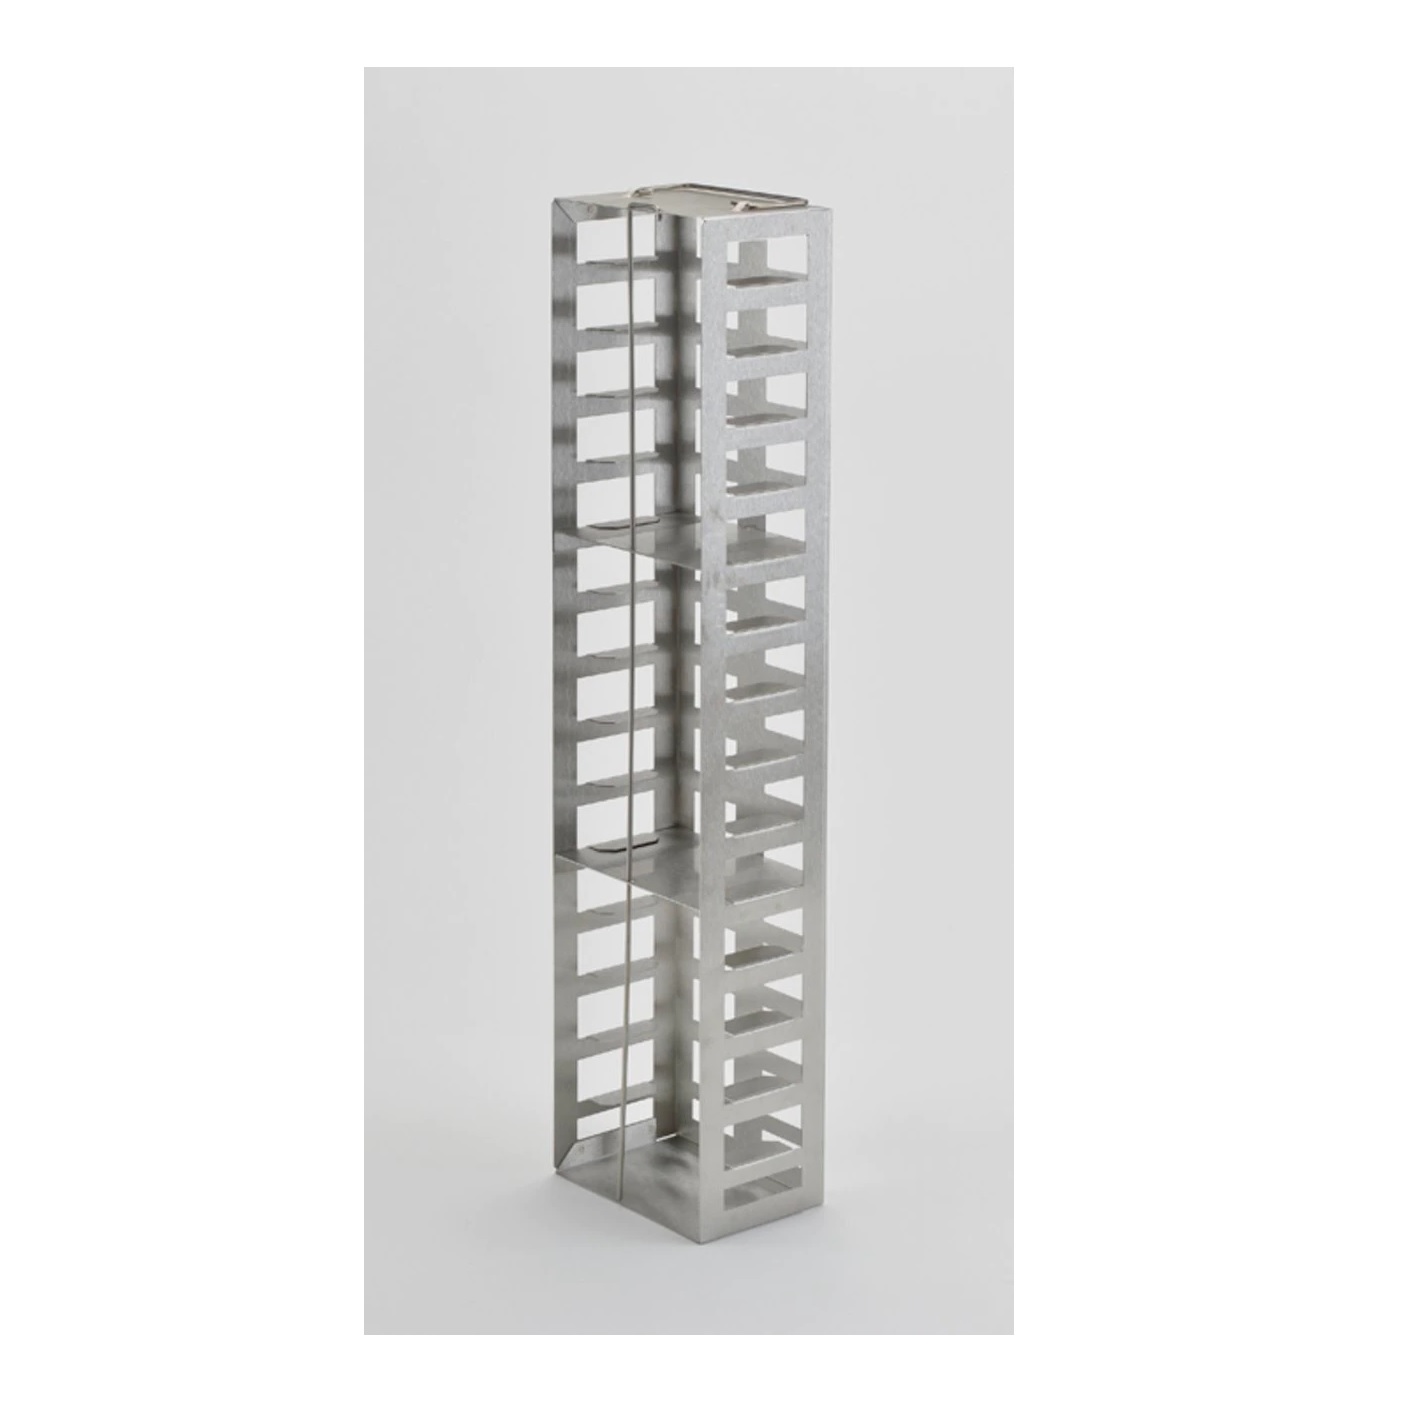 Thermo Scientific™ Dense Storage Racks, Holds Plates (5/Rack), For CryoPlus 1, 2, 3, 4 and Mechanical Cryogenic Chest Freezer